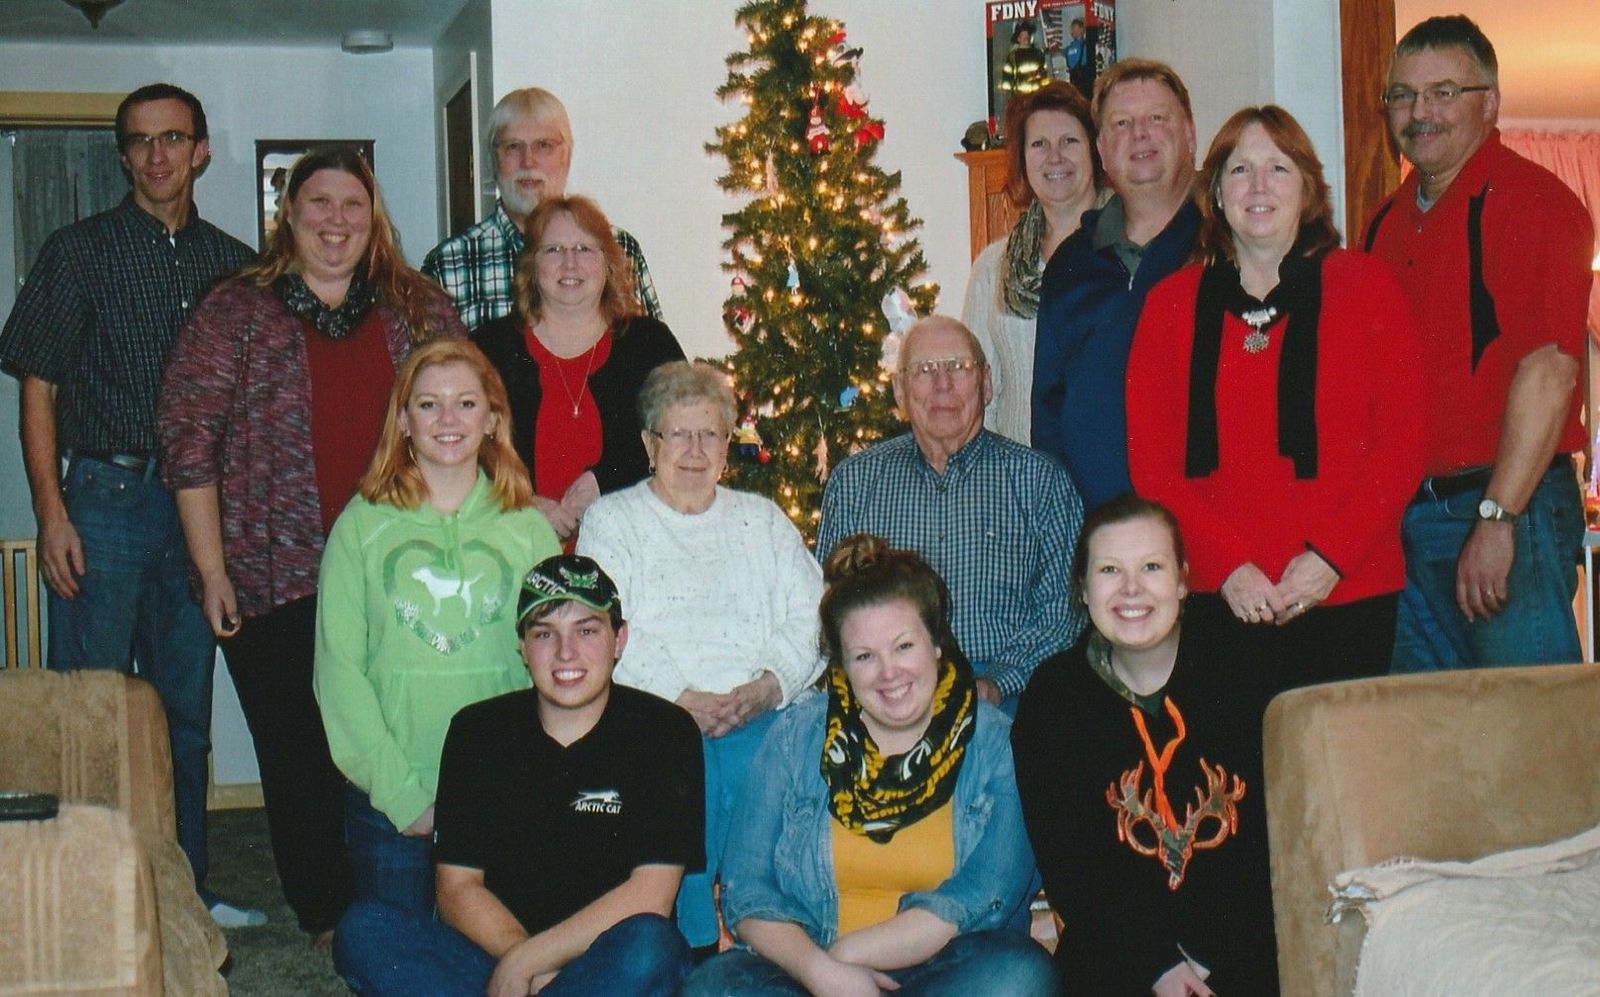 Krista's family at Christmas. We celebrate on Christmas Eve.